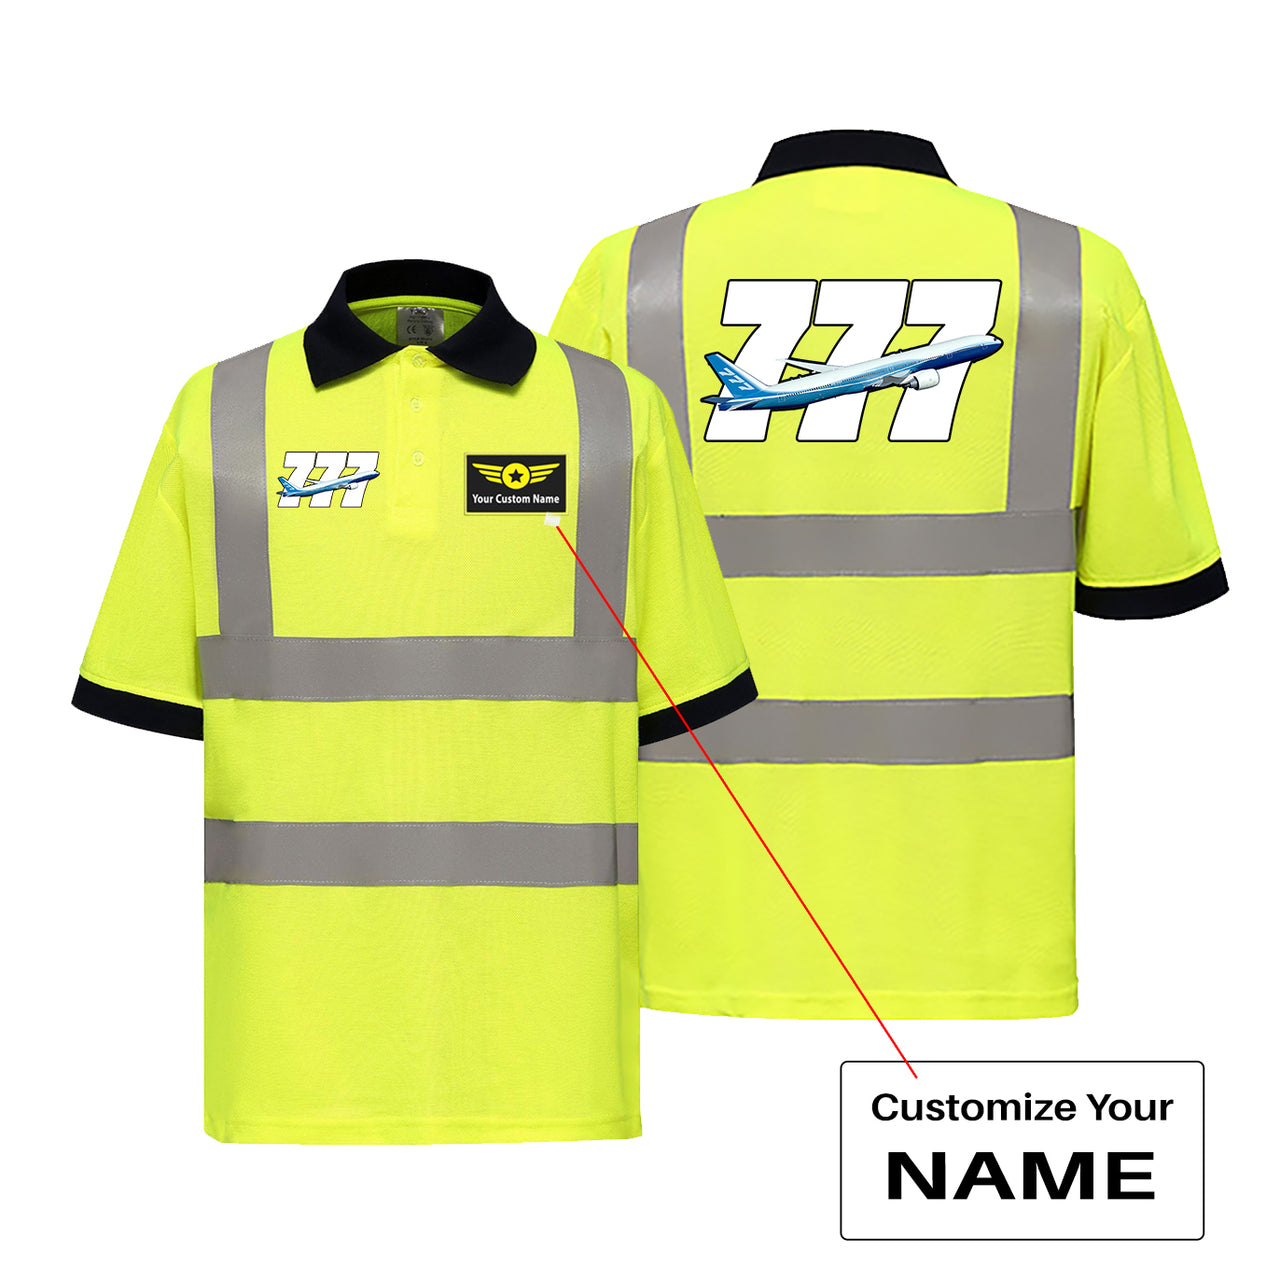 Super Boeing 777 Designed Reflective Polo T-Shirts